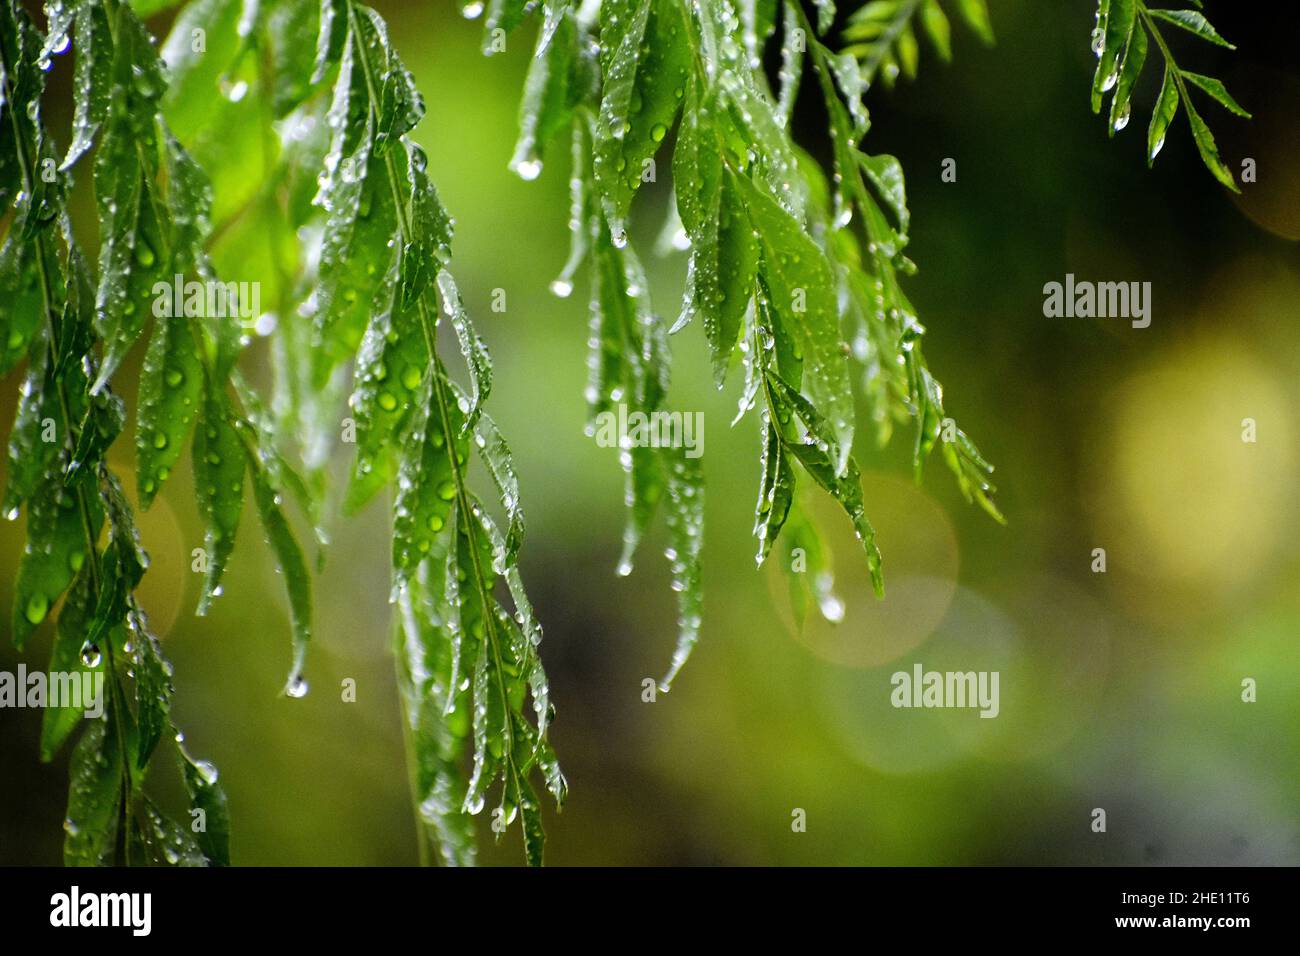 Closeup shot of rain drops on the green leaves of a tree on a blurred background Stock Photo